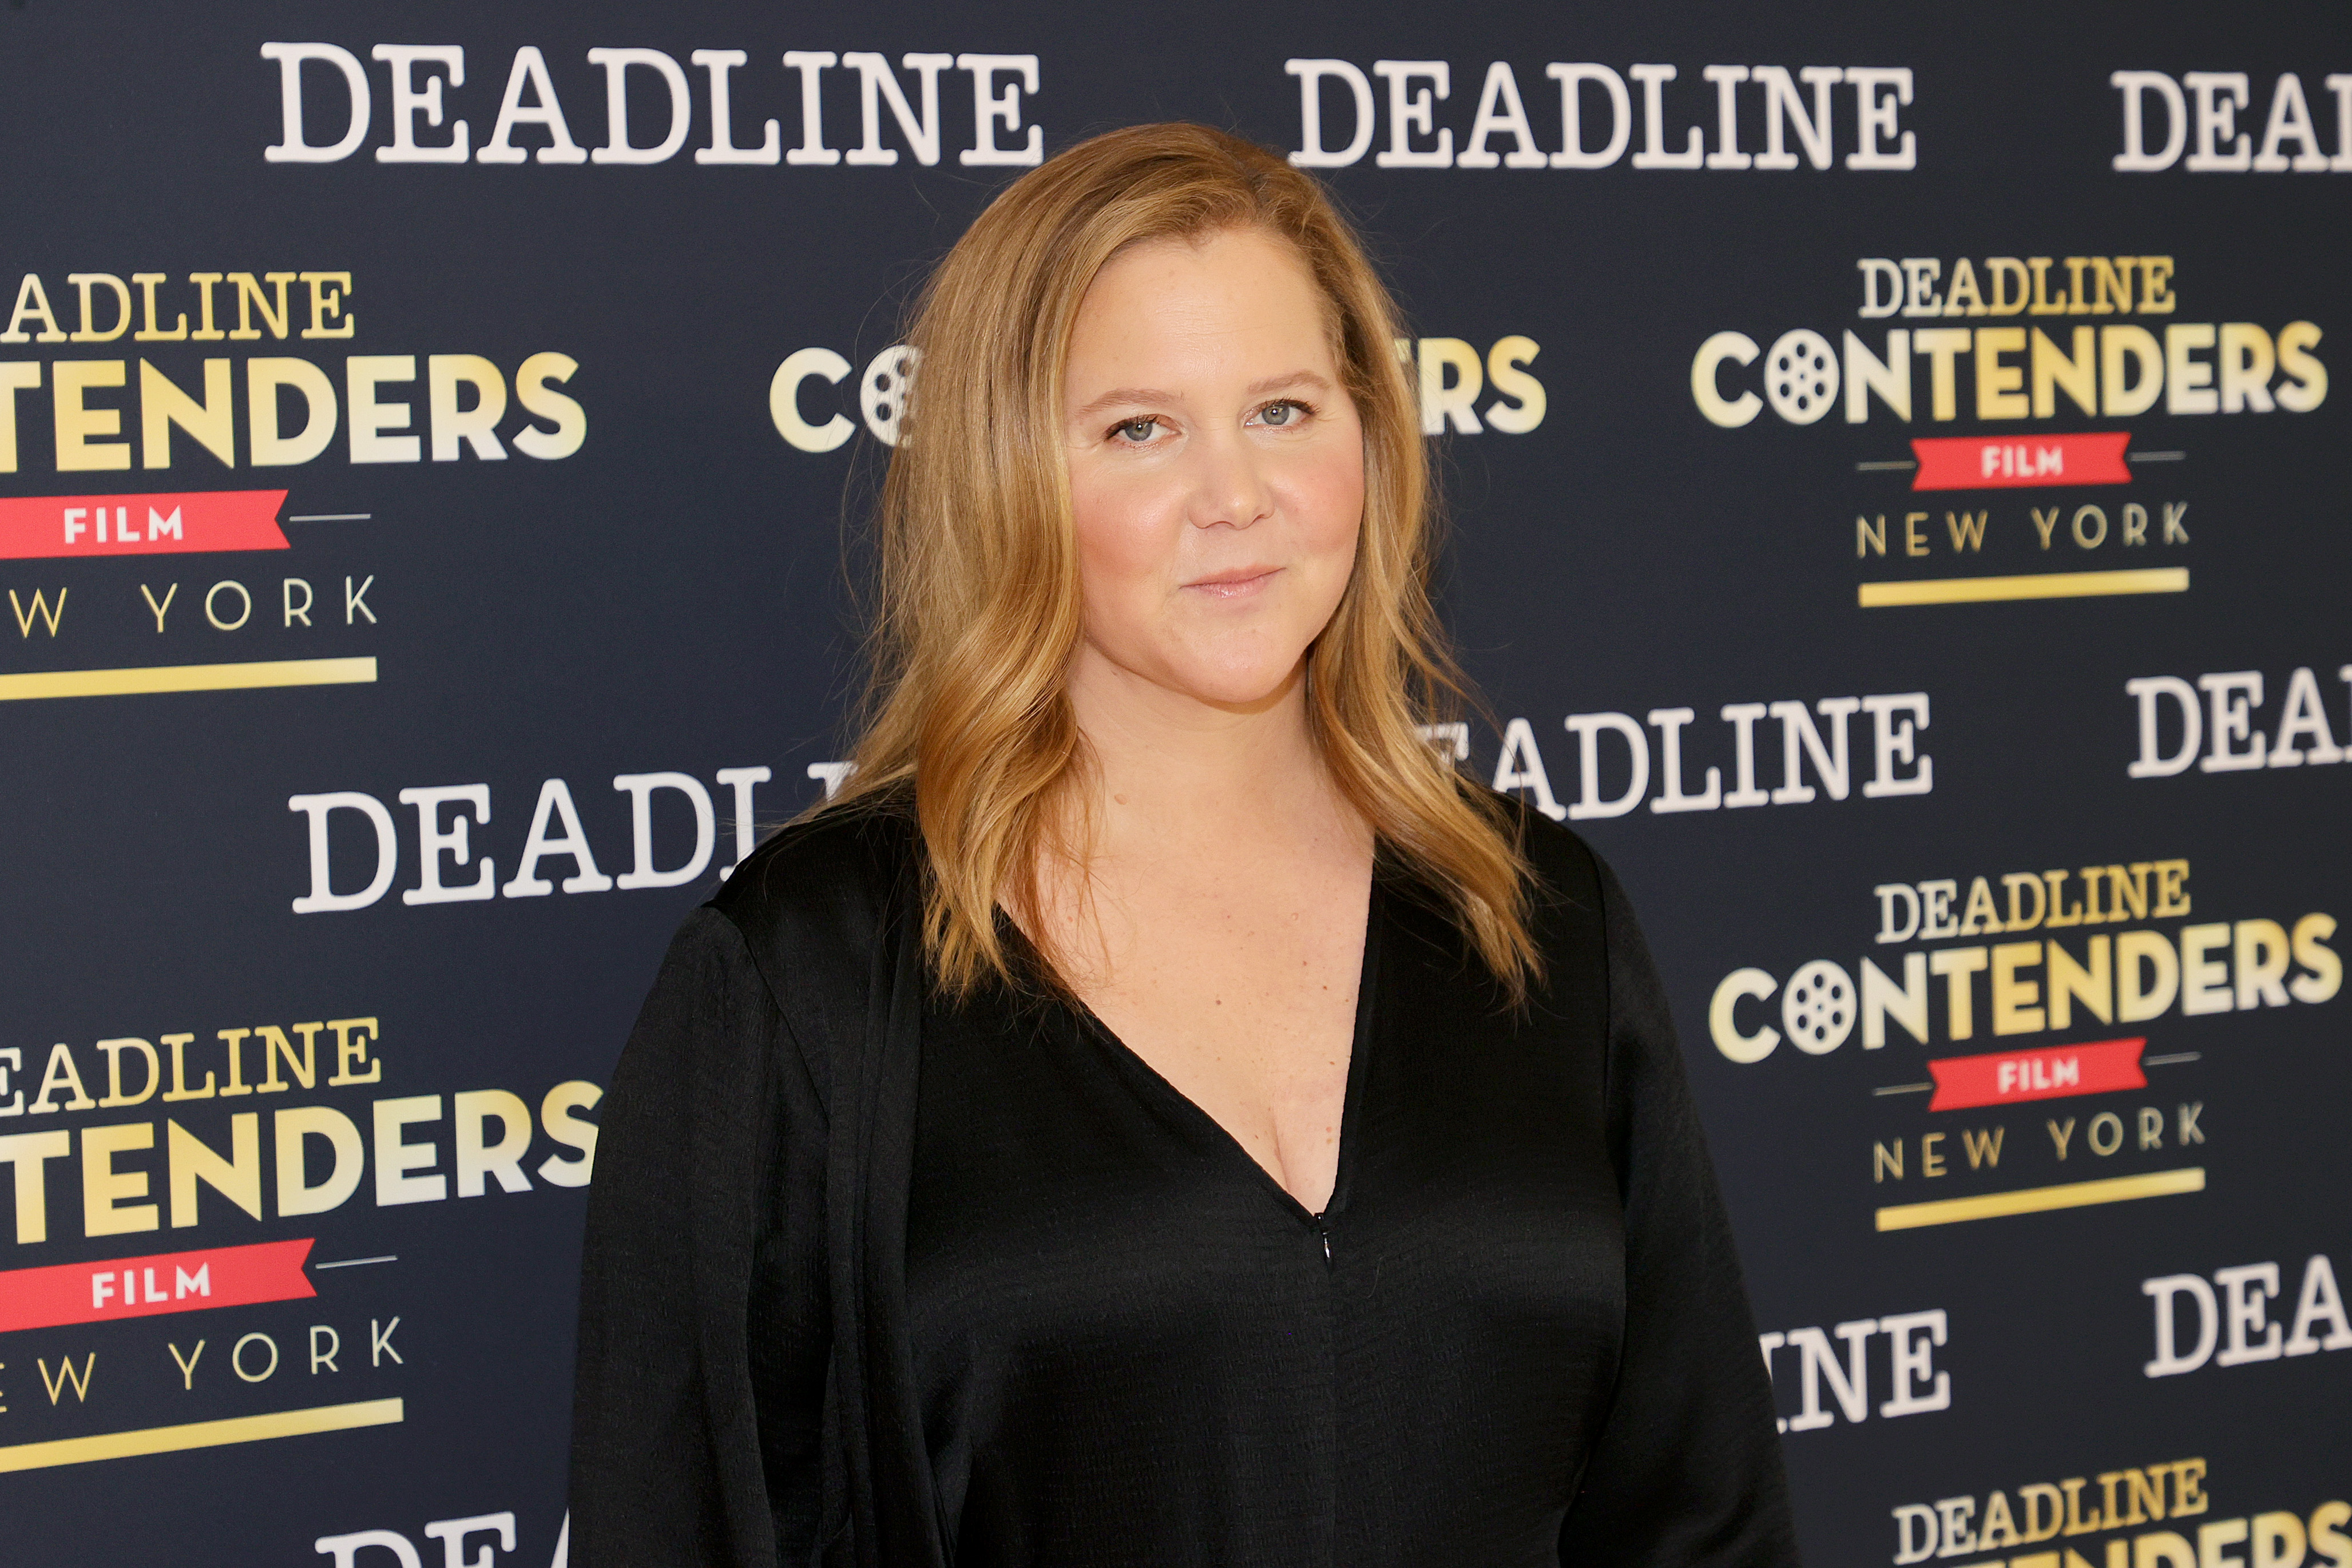 <p>Comedian <a href="https://www.wonderwall.com/celebrity/profiles/overview/amy-schumer-1586.article">Amy Schumer</a> took to Instagram in December 2021 to reveal that she was unhappy with facial fillers she got earlier in the year and wanted them dissolved. A month later, she further revealed she'd had liposuction too and soon detailed why she did it...</p>